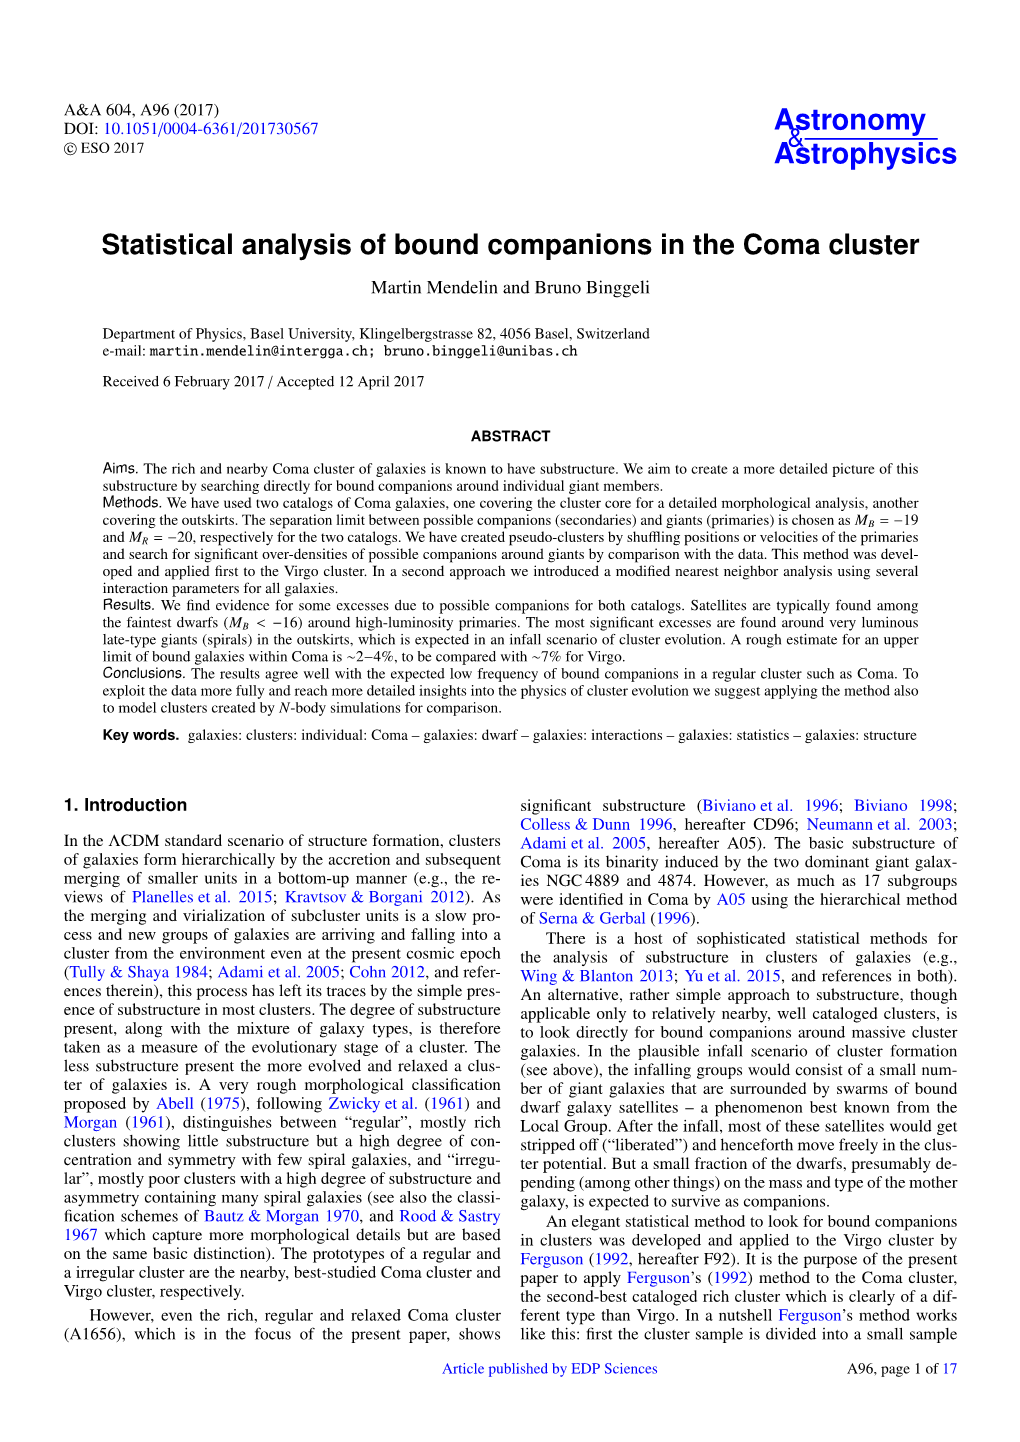 Statistical Analysis of Bound Companions in the Coma Cluster Martin Mendelin and Bruno Binggeli